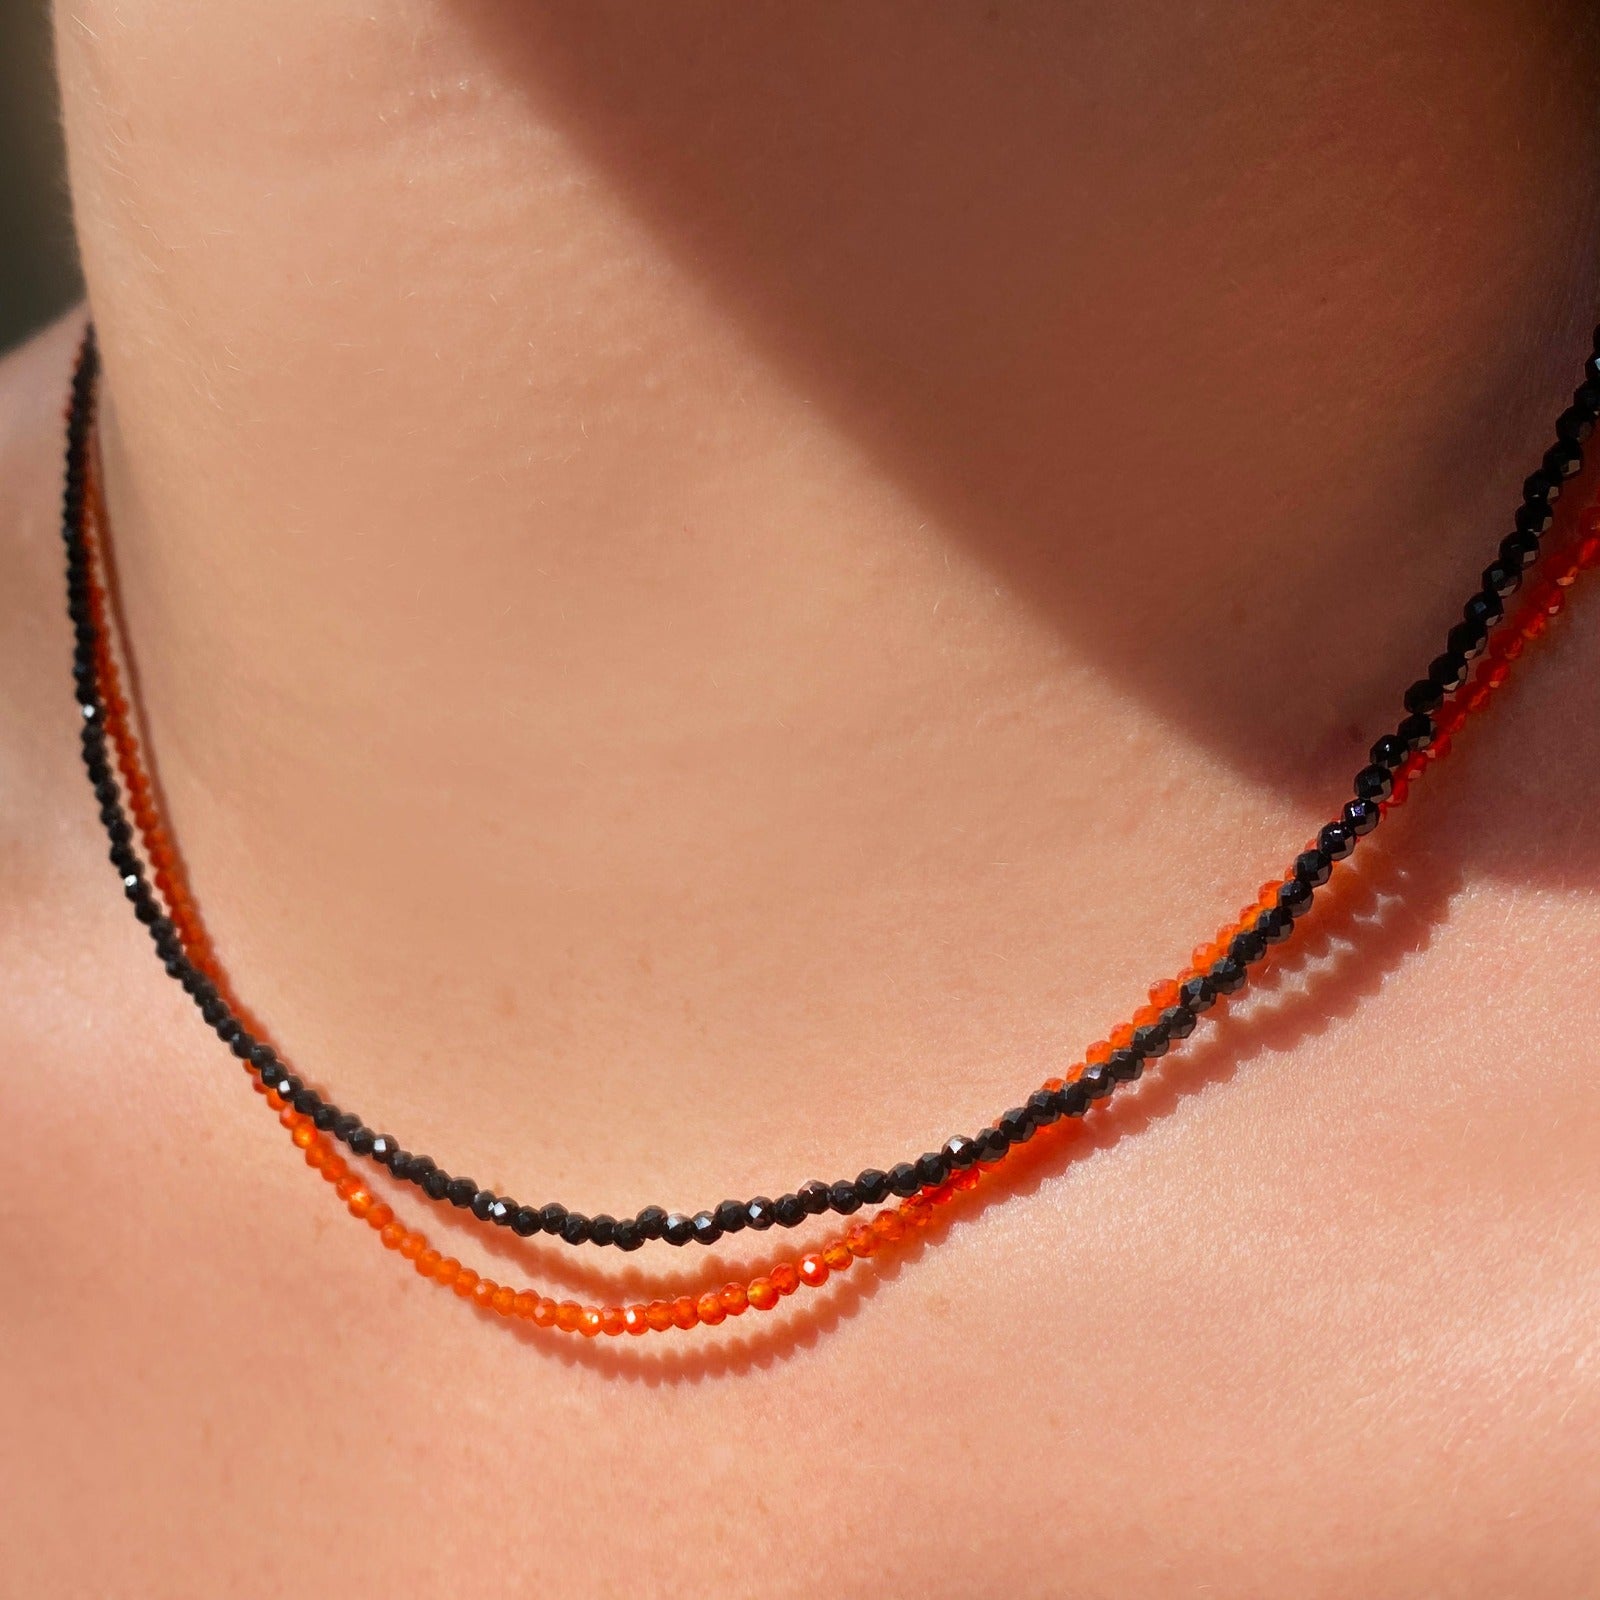 Two shimmering beaded necklaces made of 2mm faceted opals in shades of black and orange on a gold linking lobster clasp.